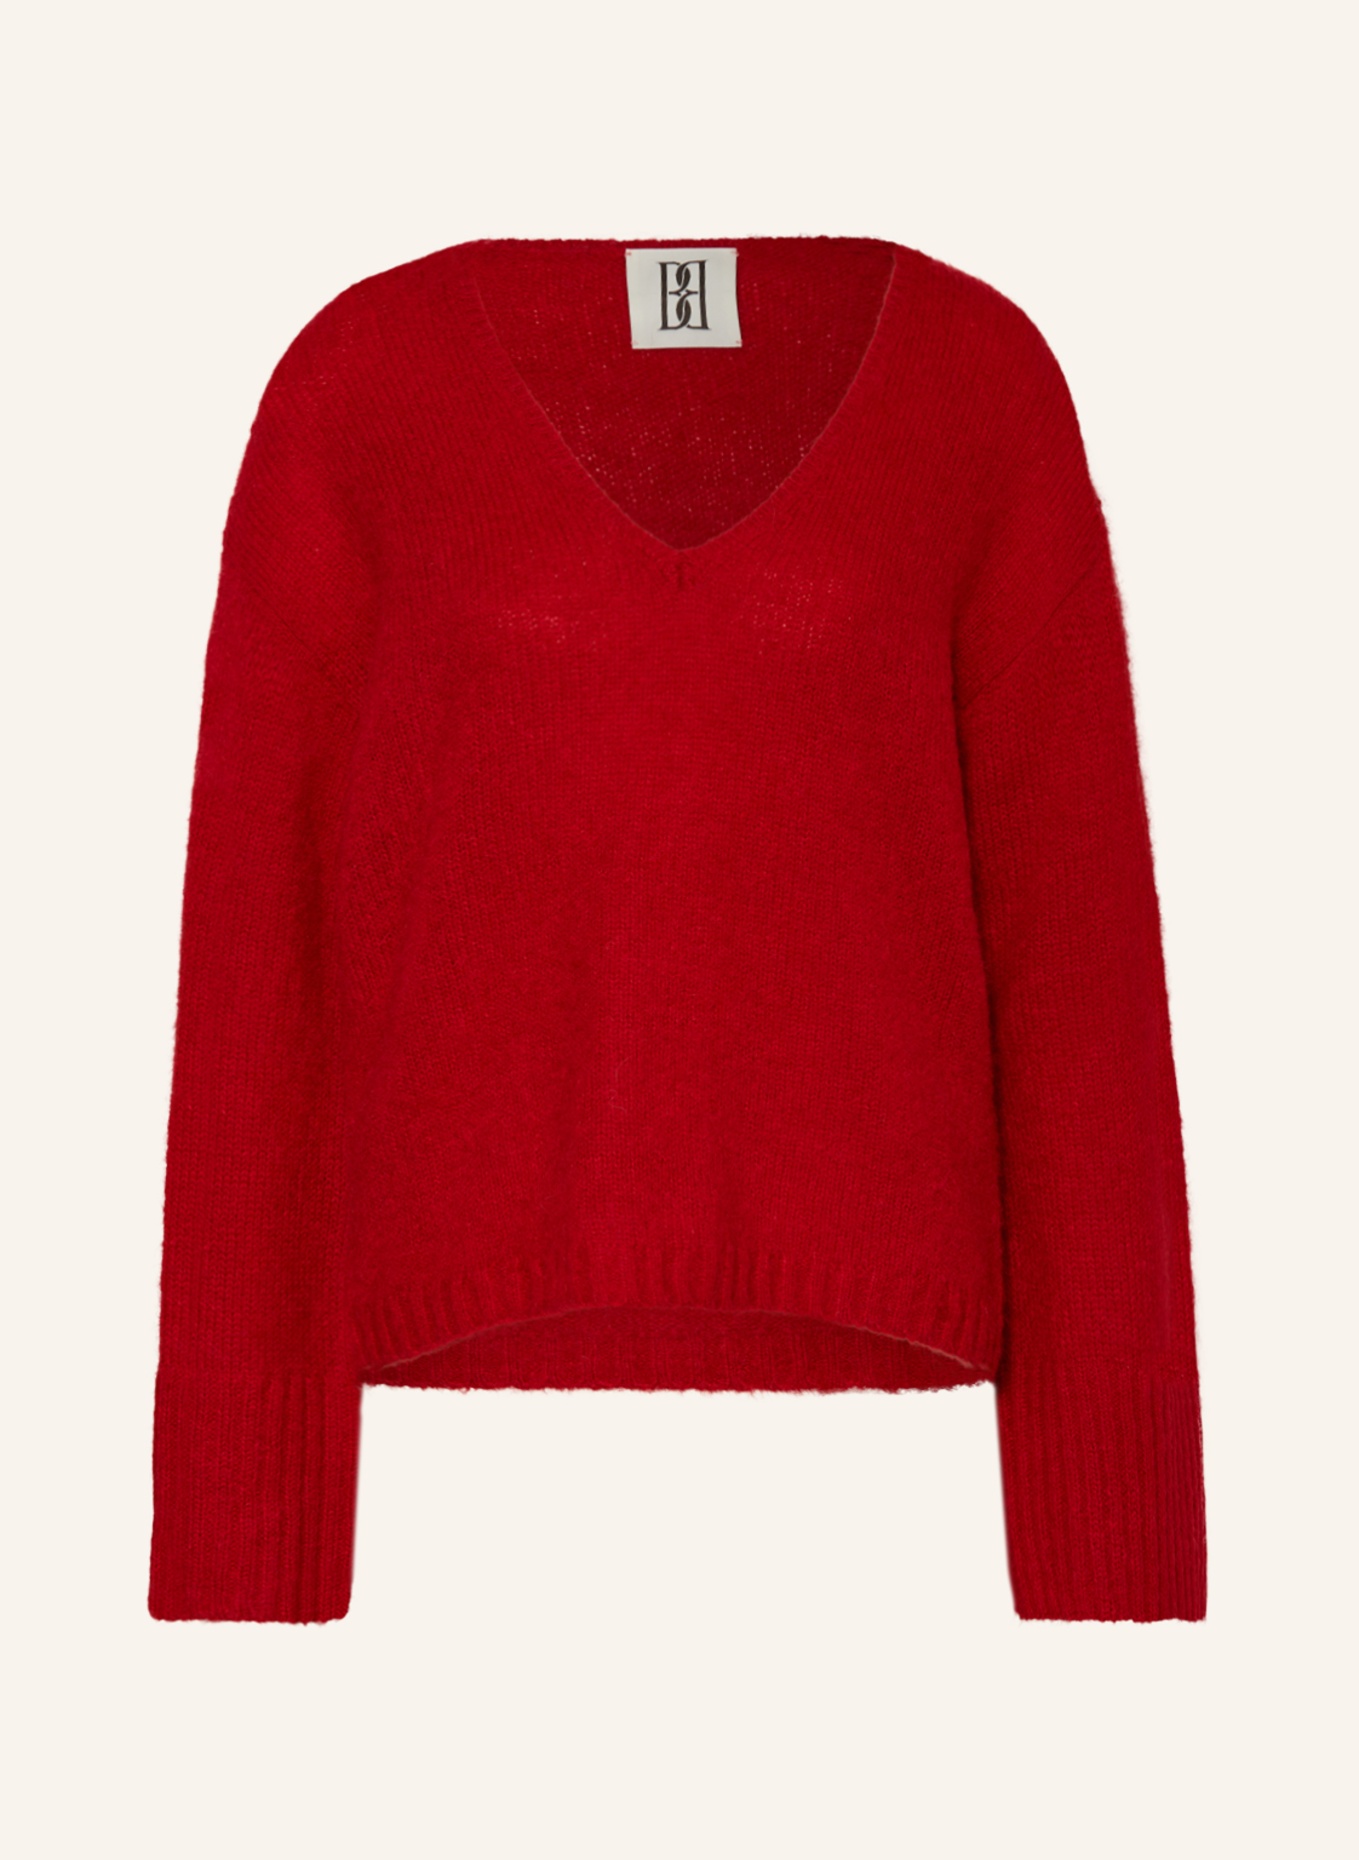 BY MALENE BIRGER Sweater CIMONE with mohair, Color: RED (Image 1)